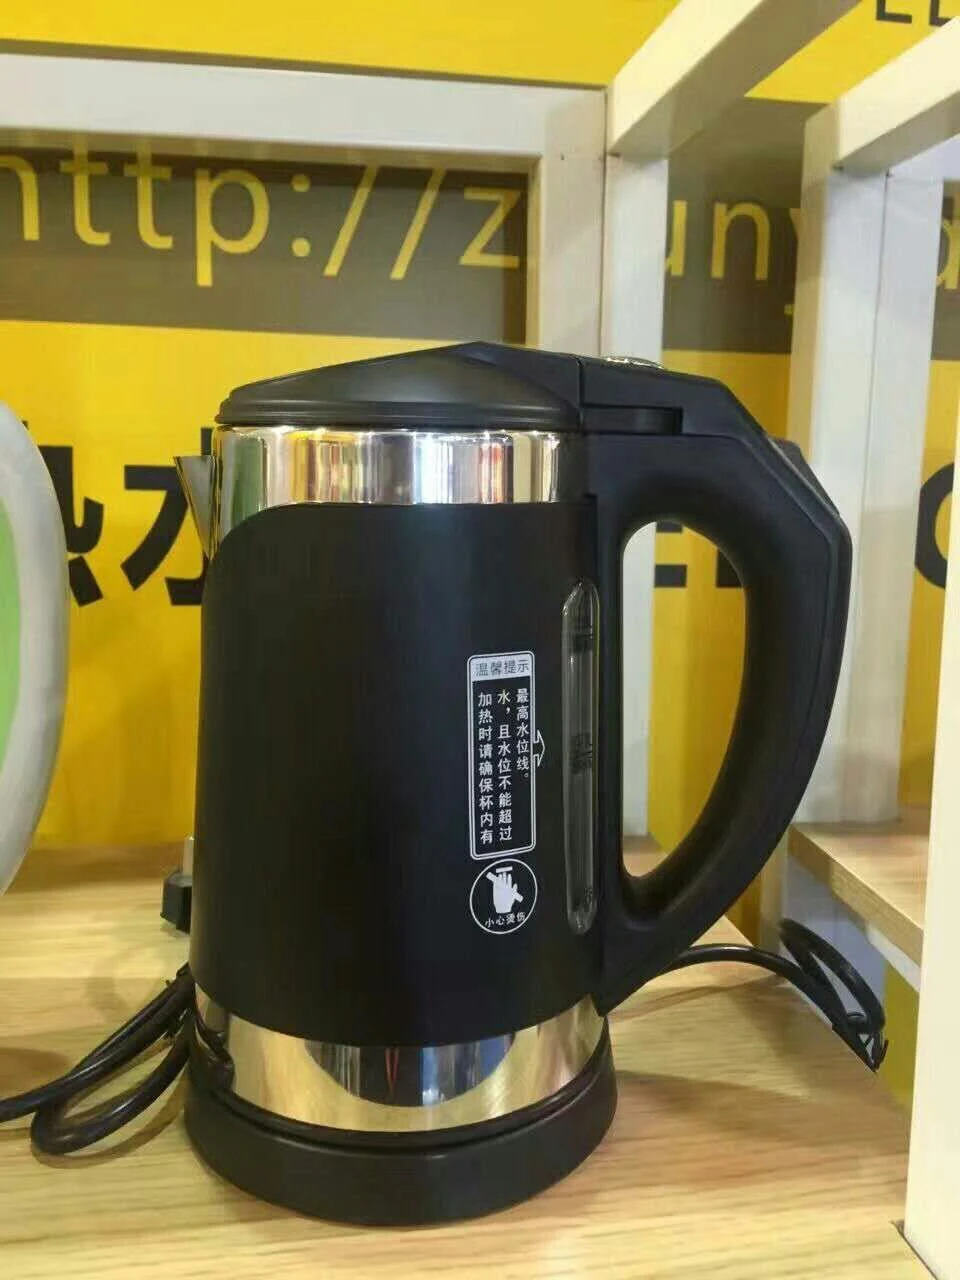 Home Appliance Stainless Steel Electrical Kettle No. Zy-0032